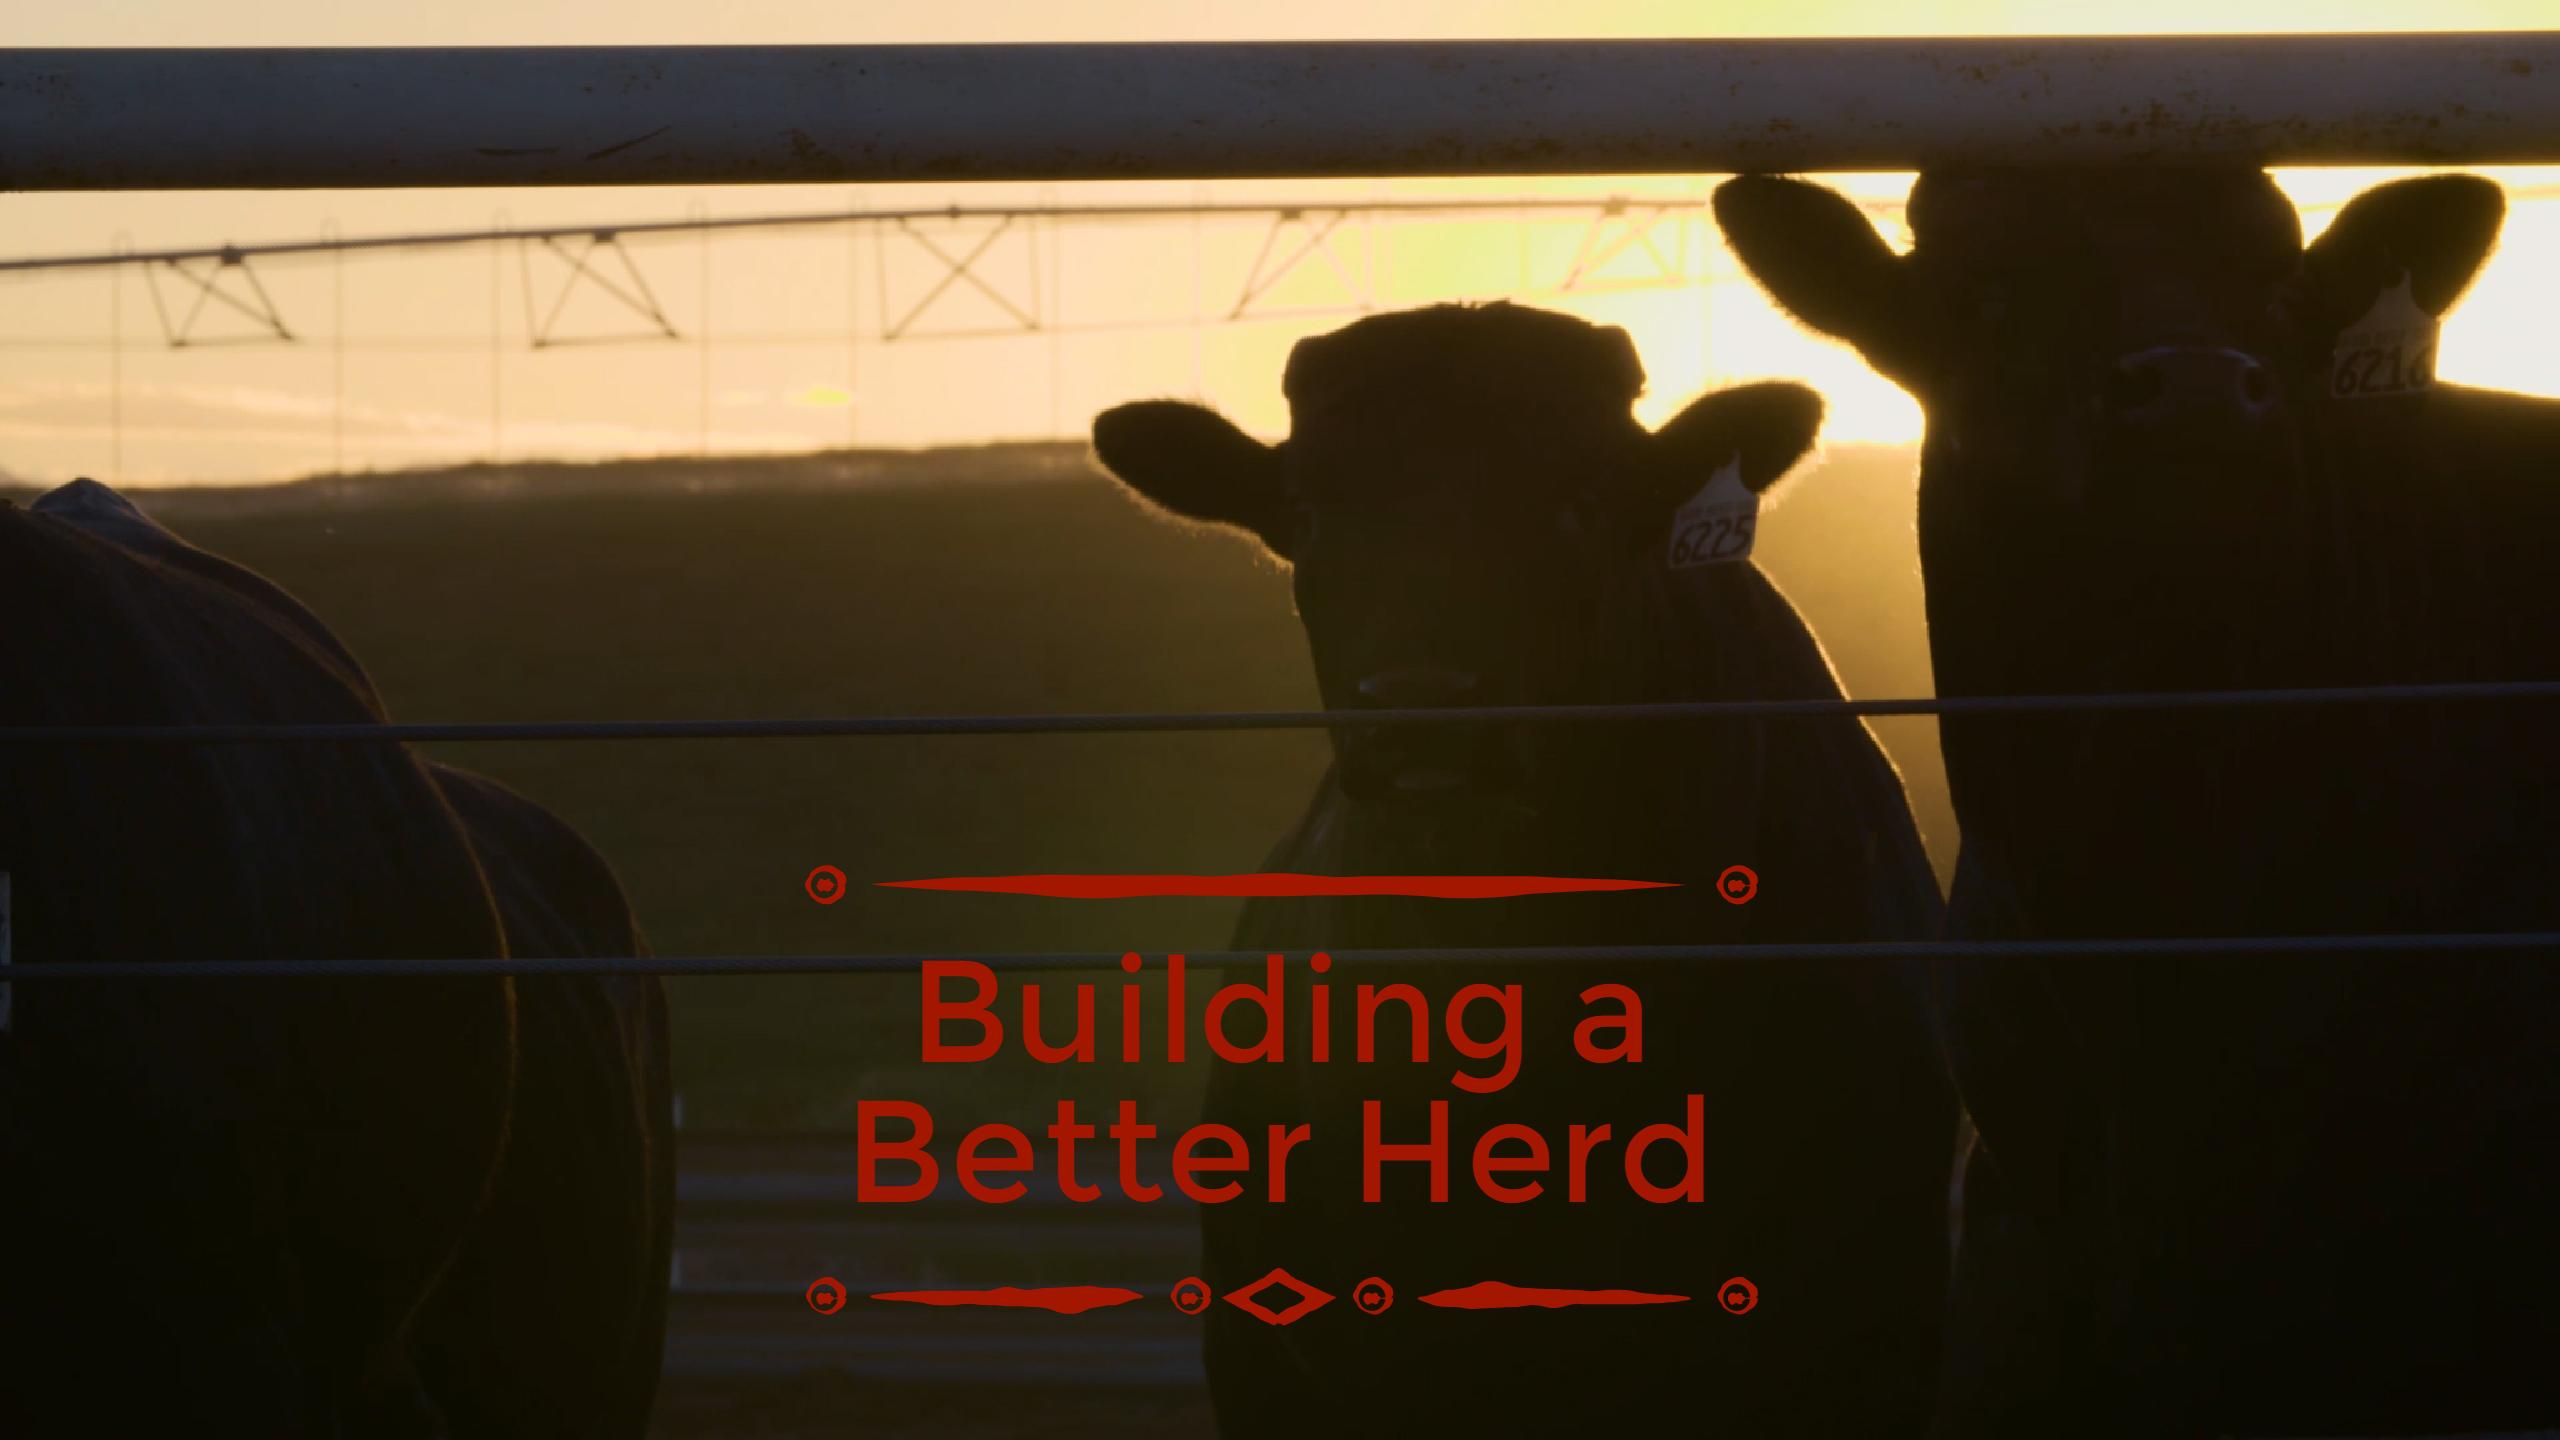 How We Improve Beef Quality Through Every Generation